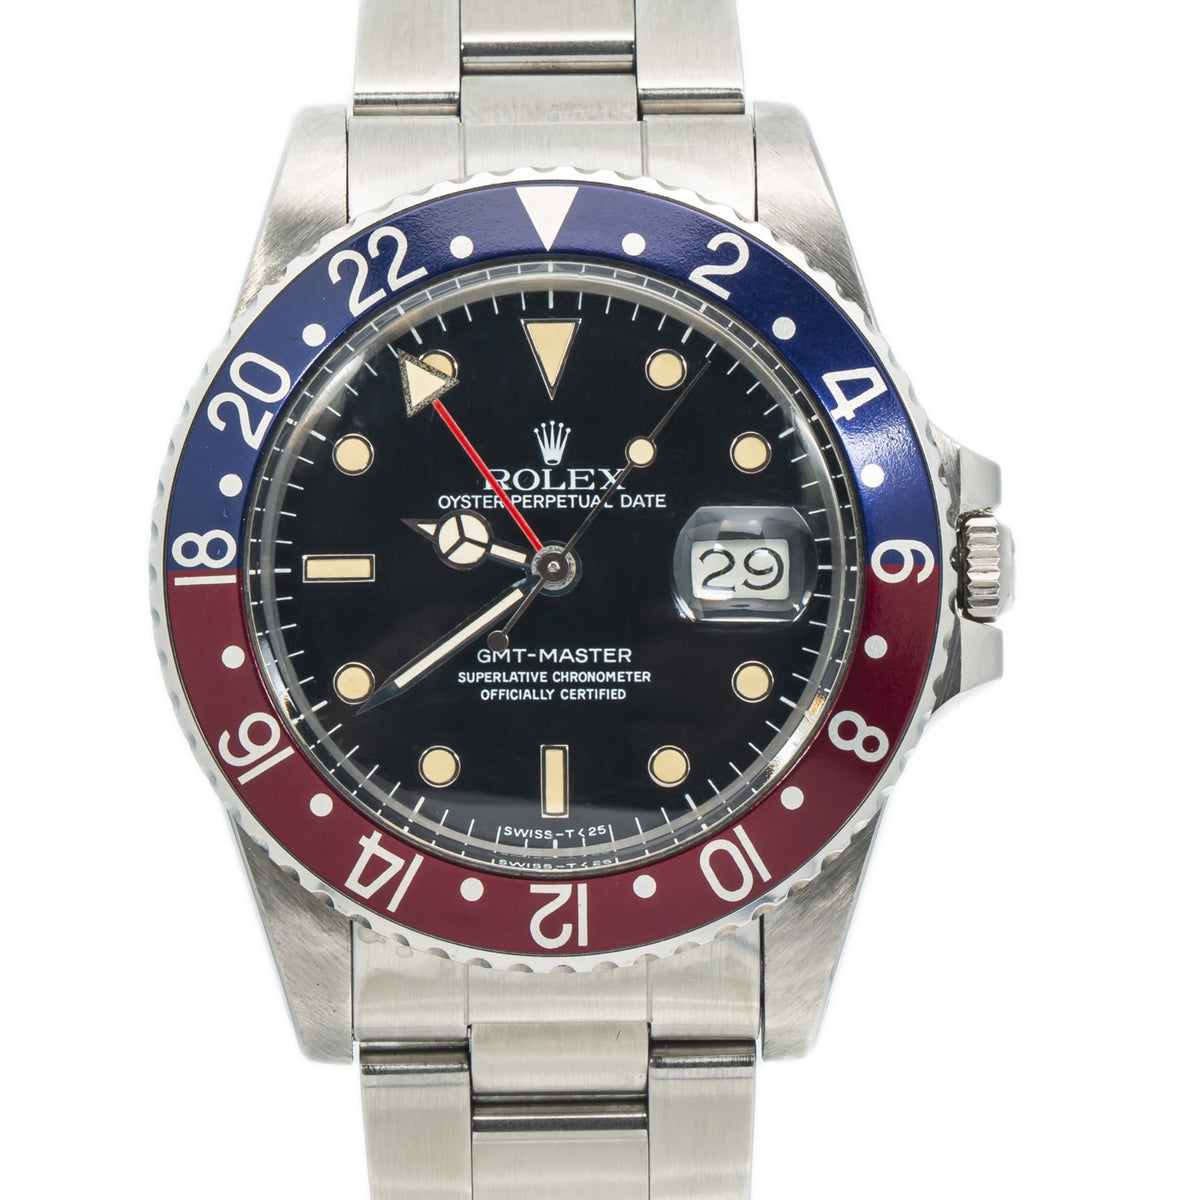 Rolex GMT Master 16750 Pepsi Unpolished MINT 1984 Patina Spider Dial Watch 40mm